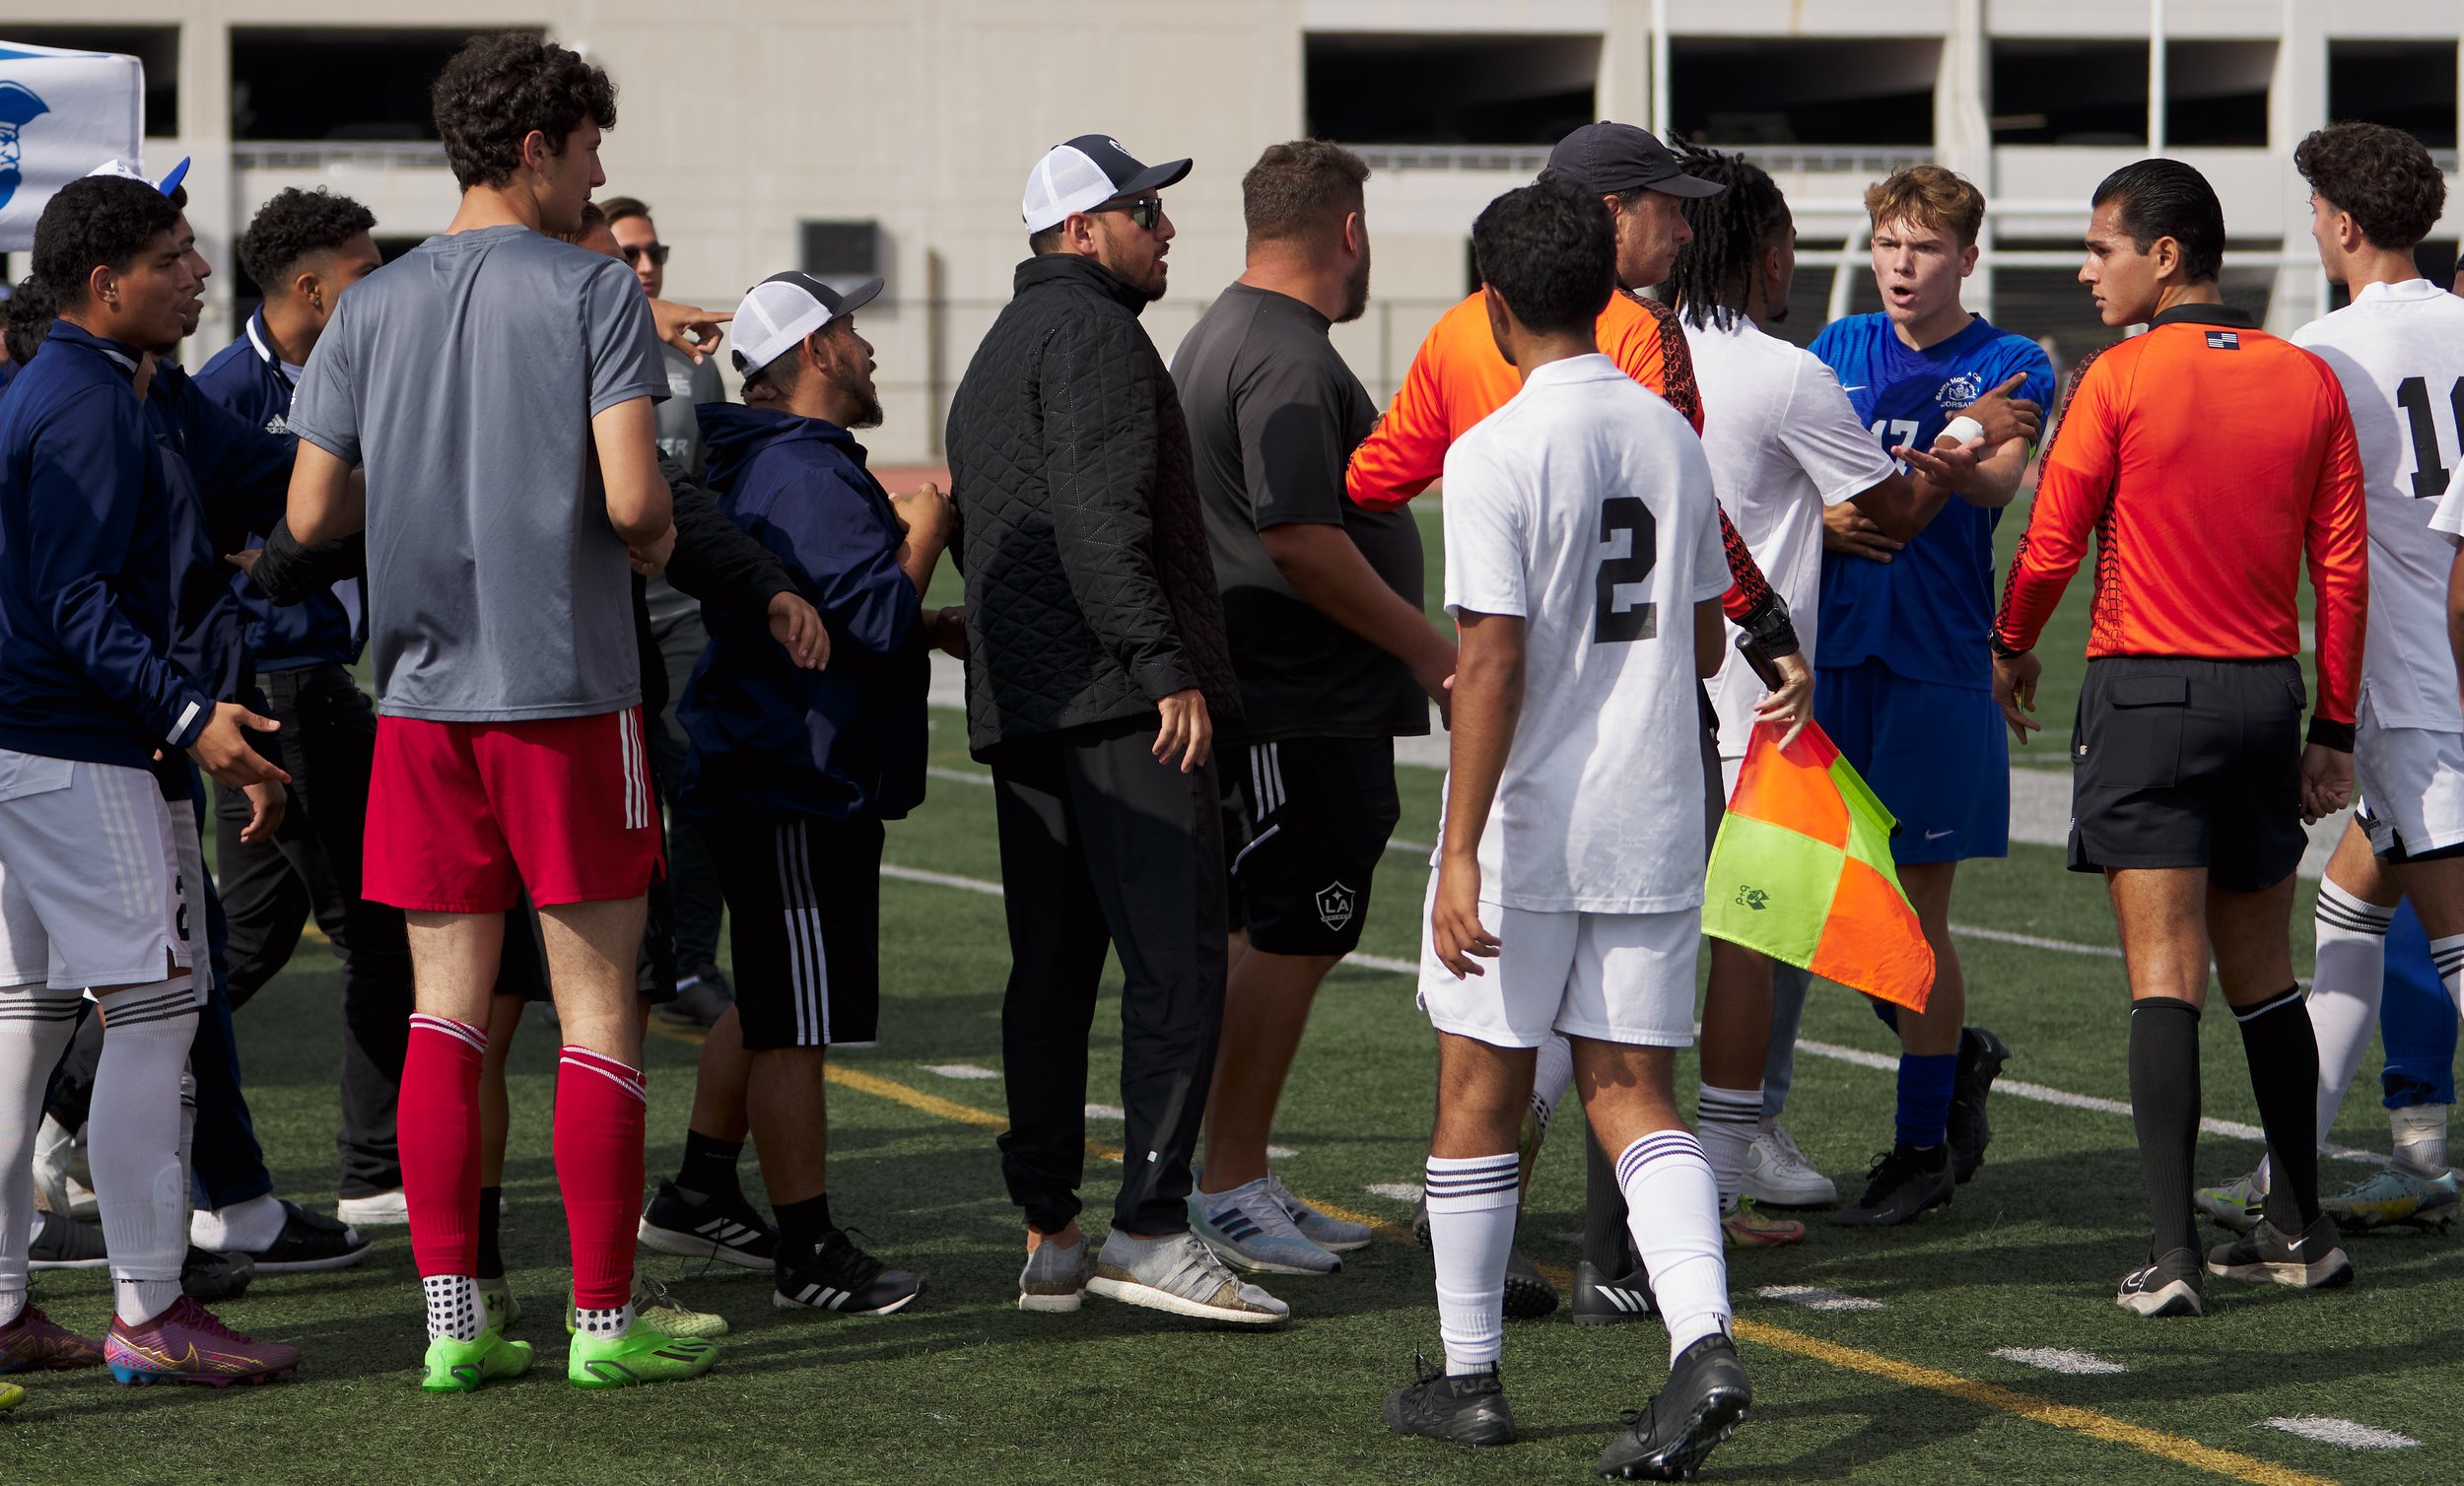  A fight broke out when Santa Monica College Corsairs' Taj Winnard (second from right) went to retrieve the ball from the tent of the Los Angeles Mission College Eagles during the men's soccer match on Tuesday, Nov. 1, 2022, at Corsair Field in Santa